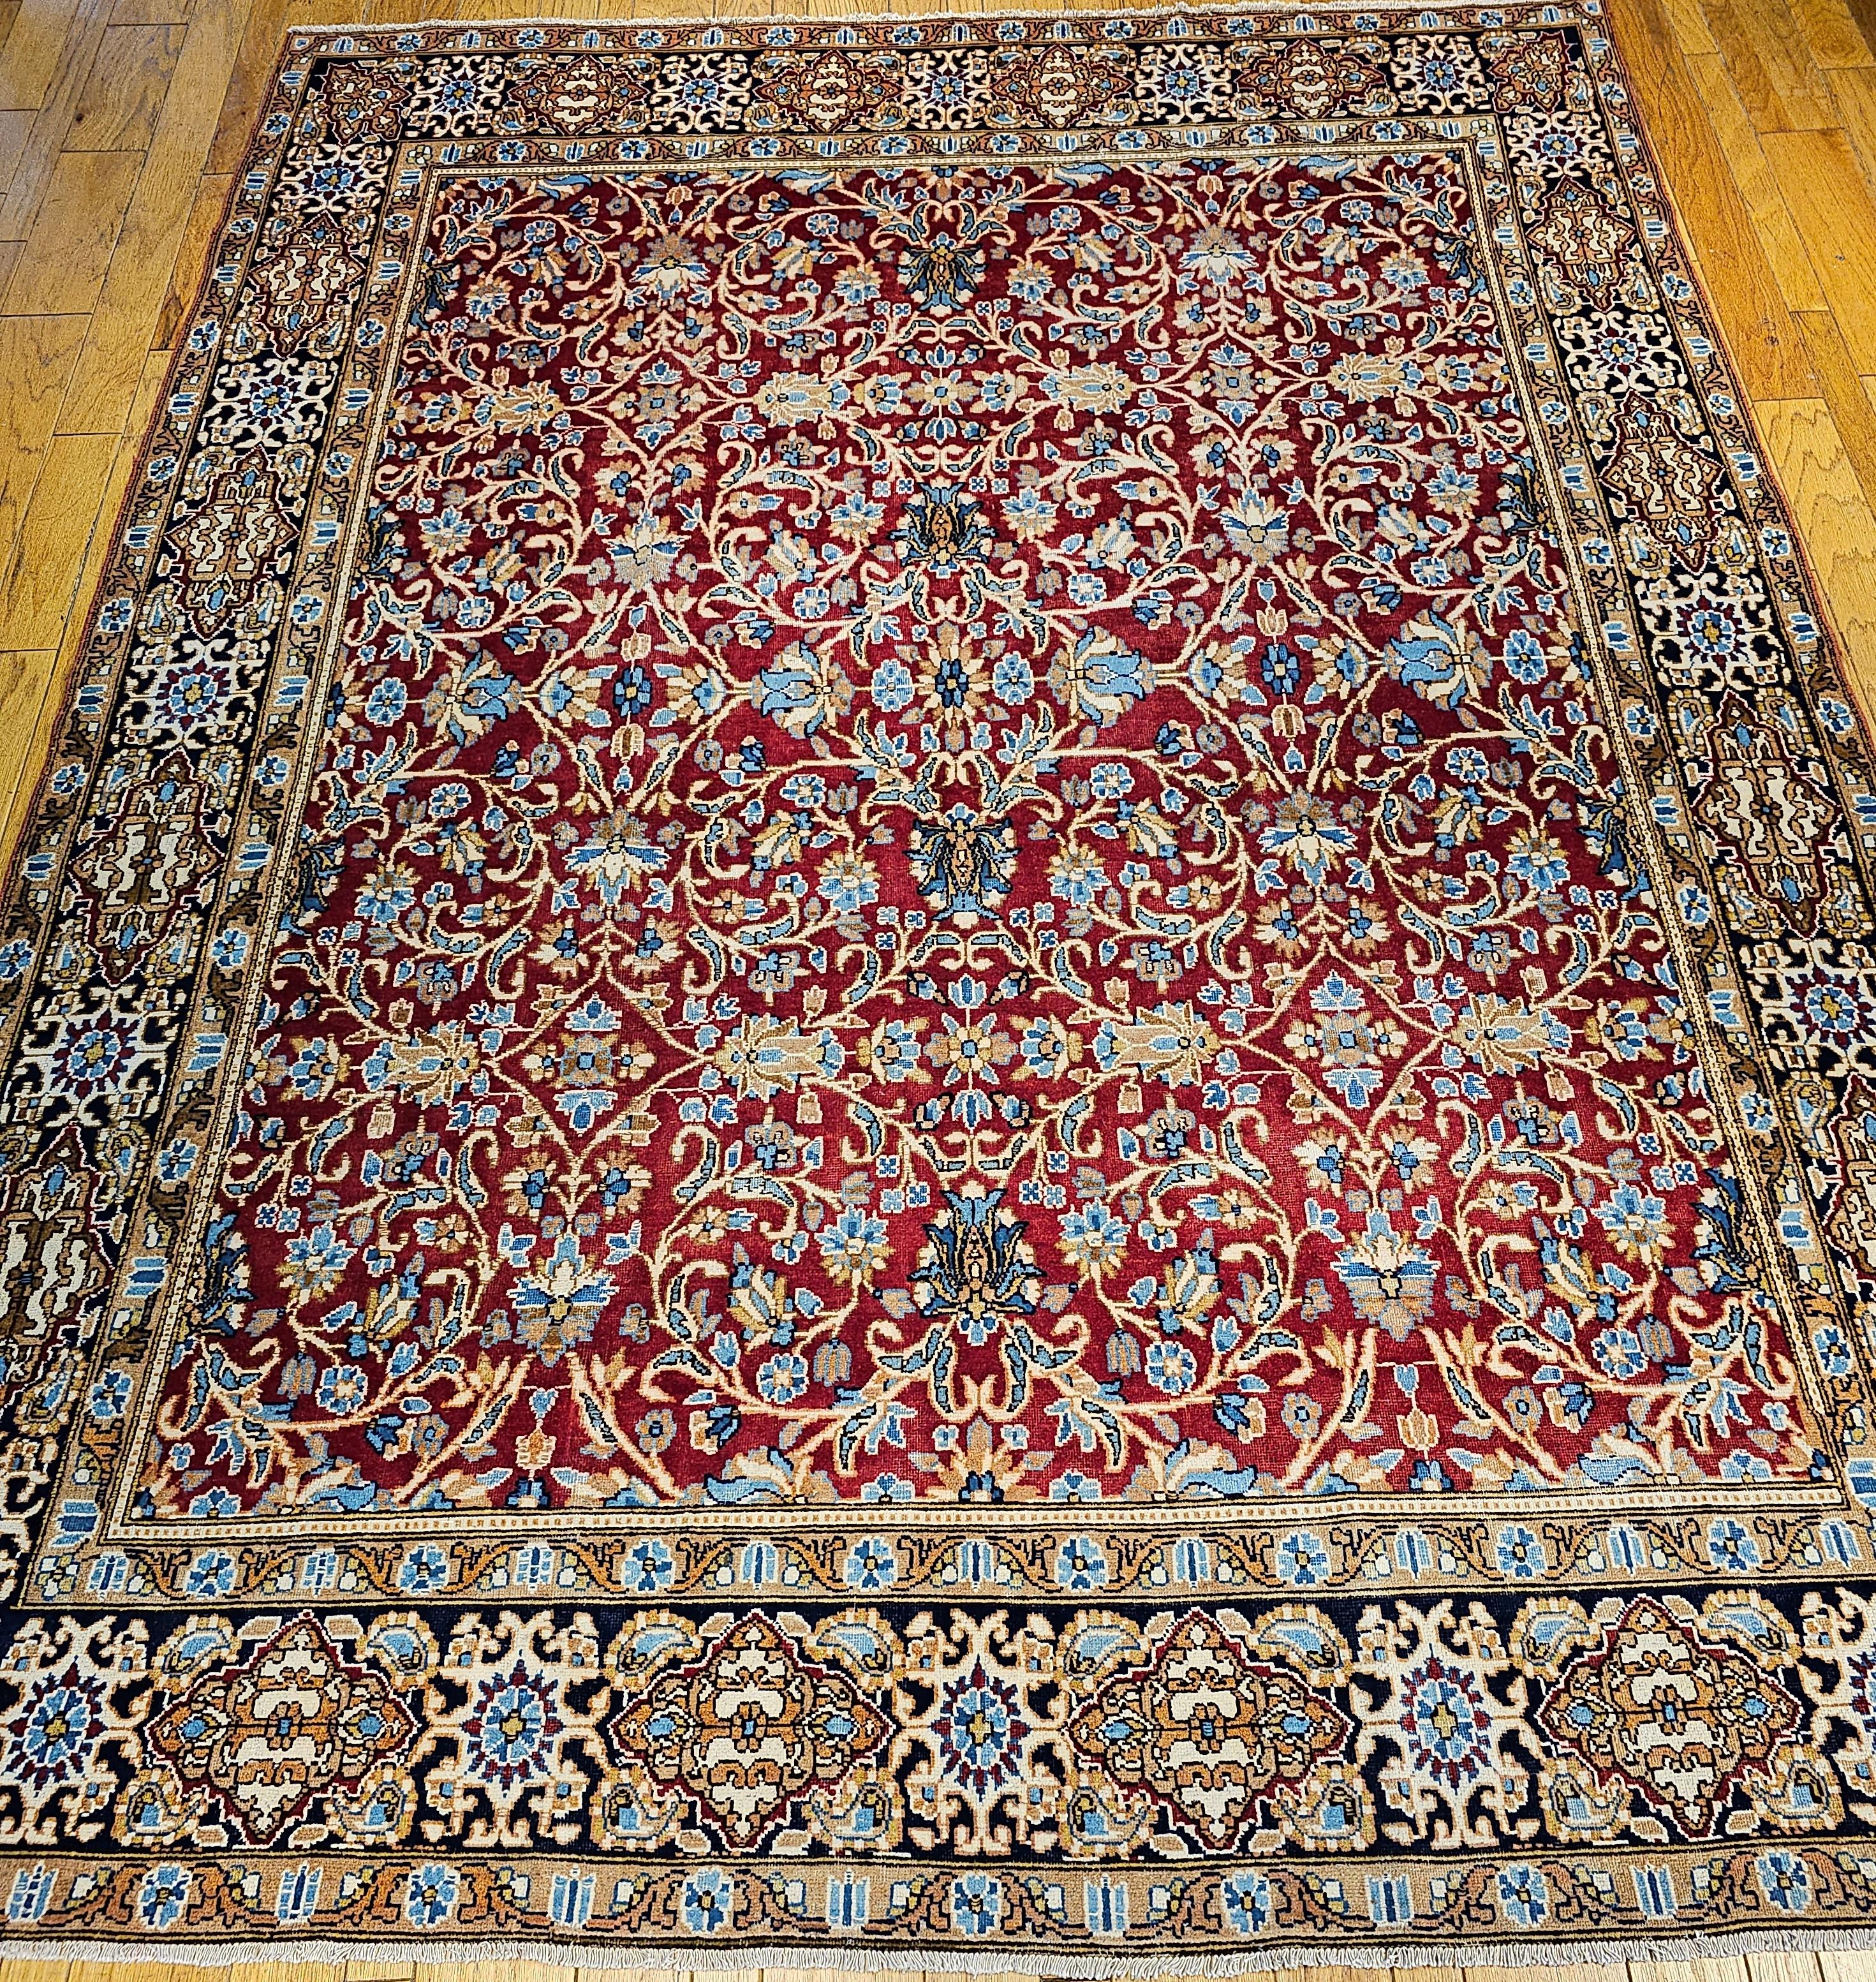 Vintage Persian Mahal Sultanabad room size rug in an allover design circa the mid 1900s.  The field is a rich red color with large scrolls reminiscent of the famous Sultanabad rug of the mid-1800s with large designs in baby  blue, cream, and light